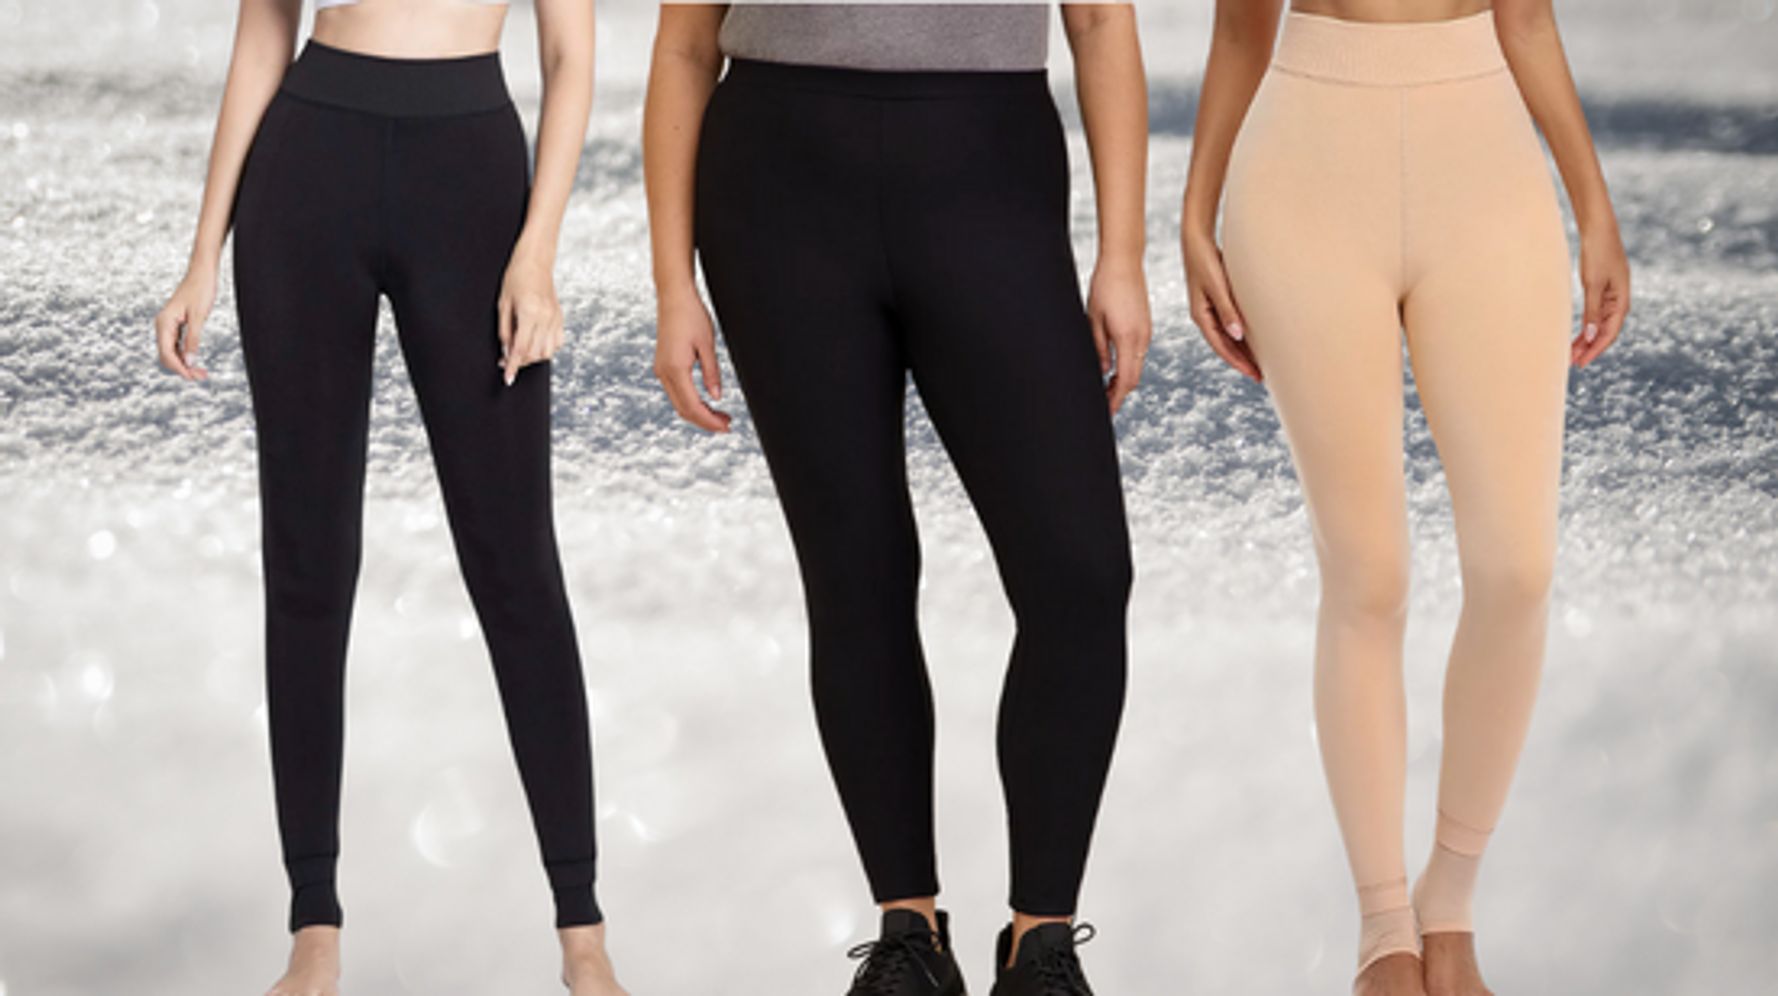 14 Of The Best Fleece-Lined Leggings To Keep Your Legs Toasty Warm